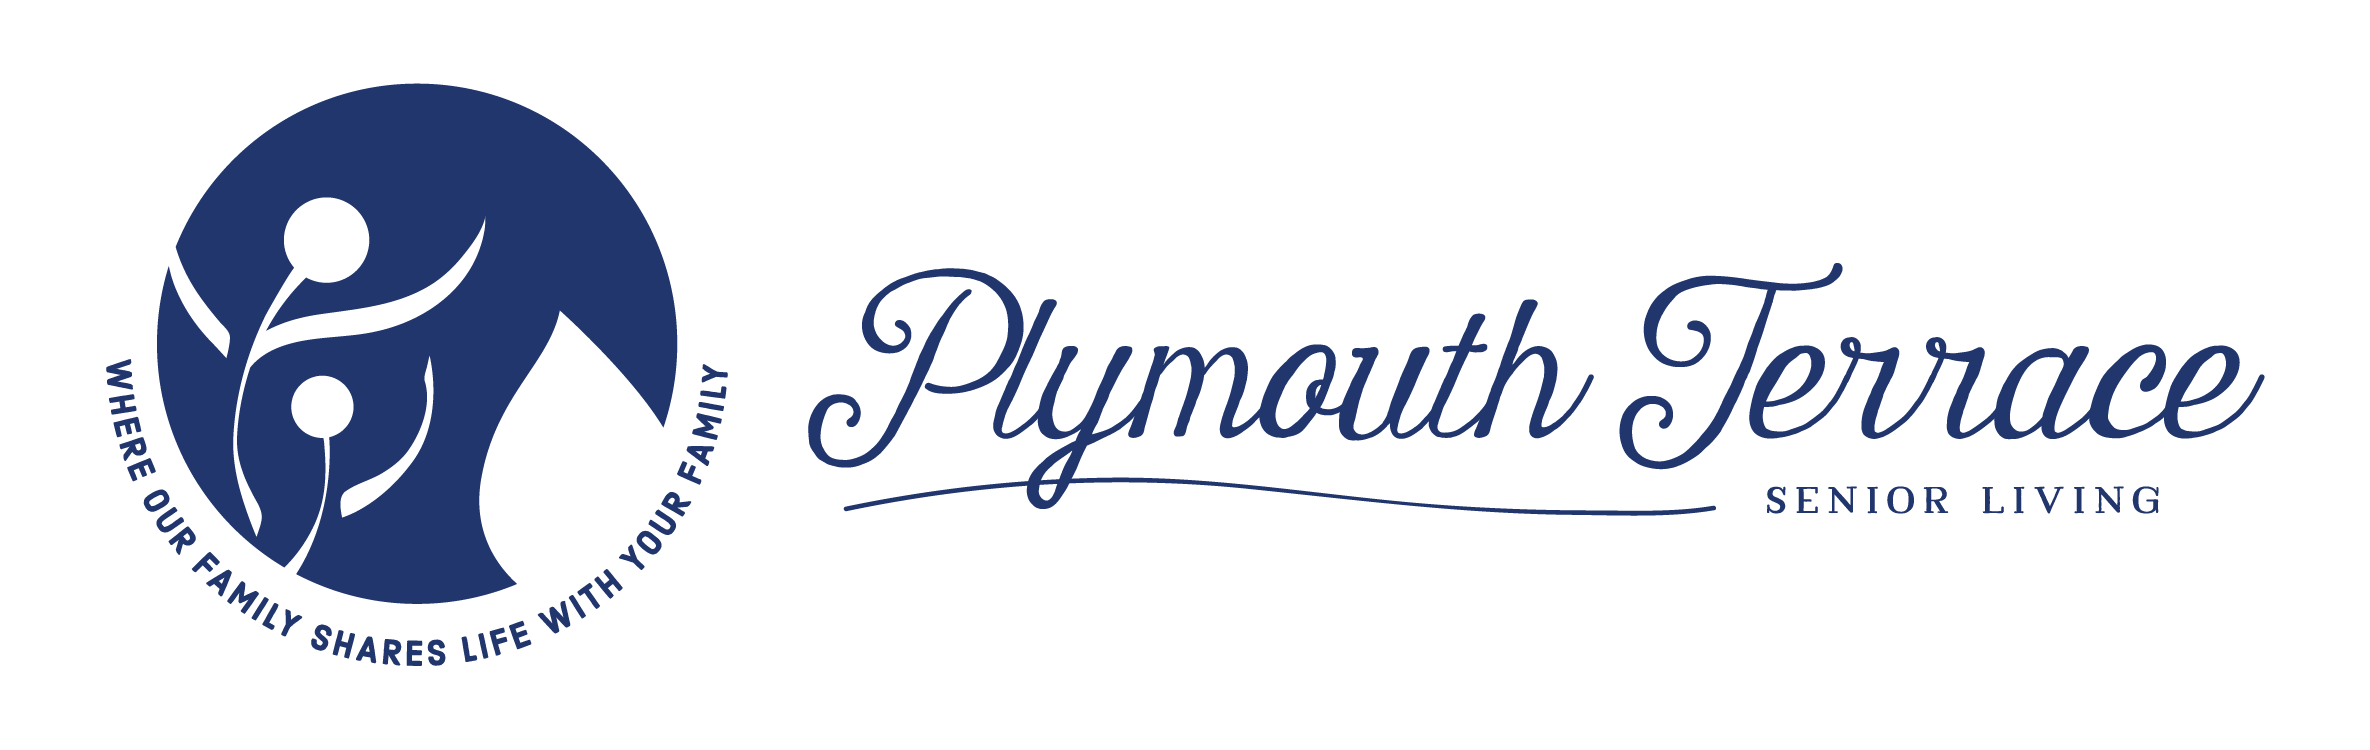 Plymouth Inn Assisted Living